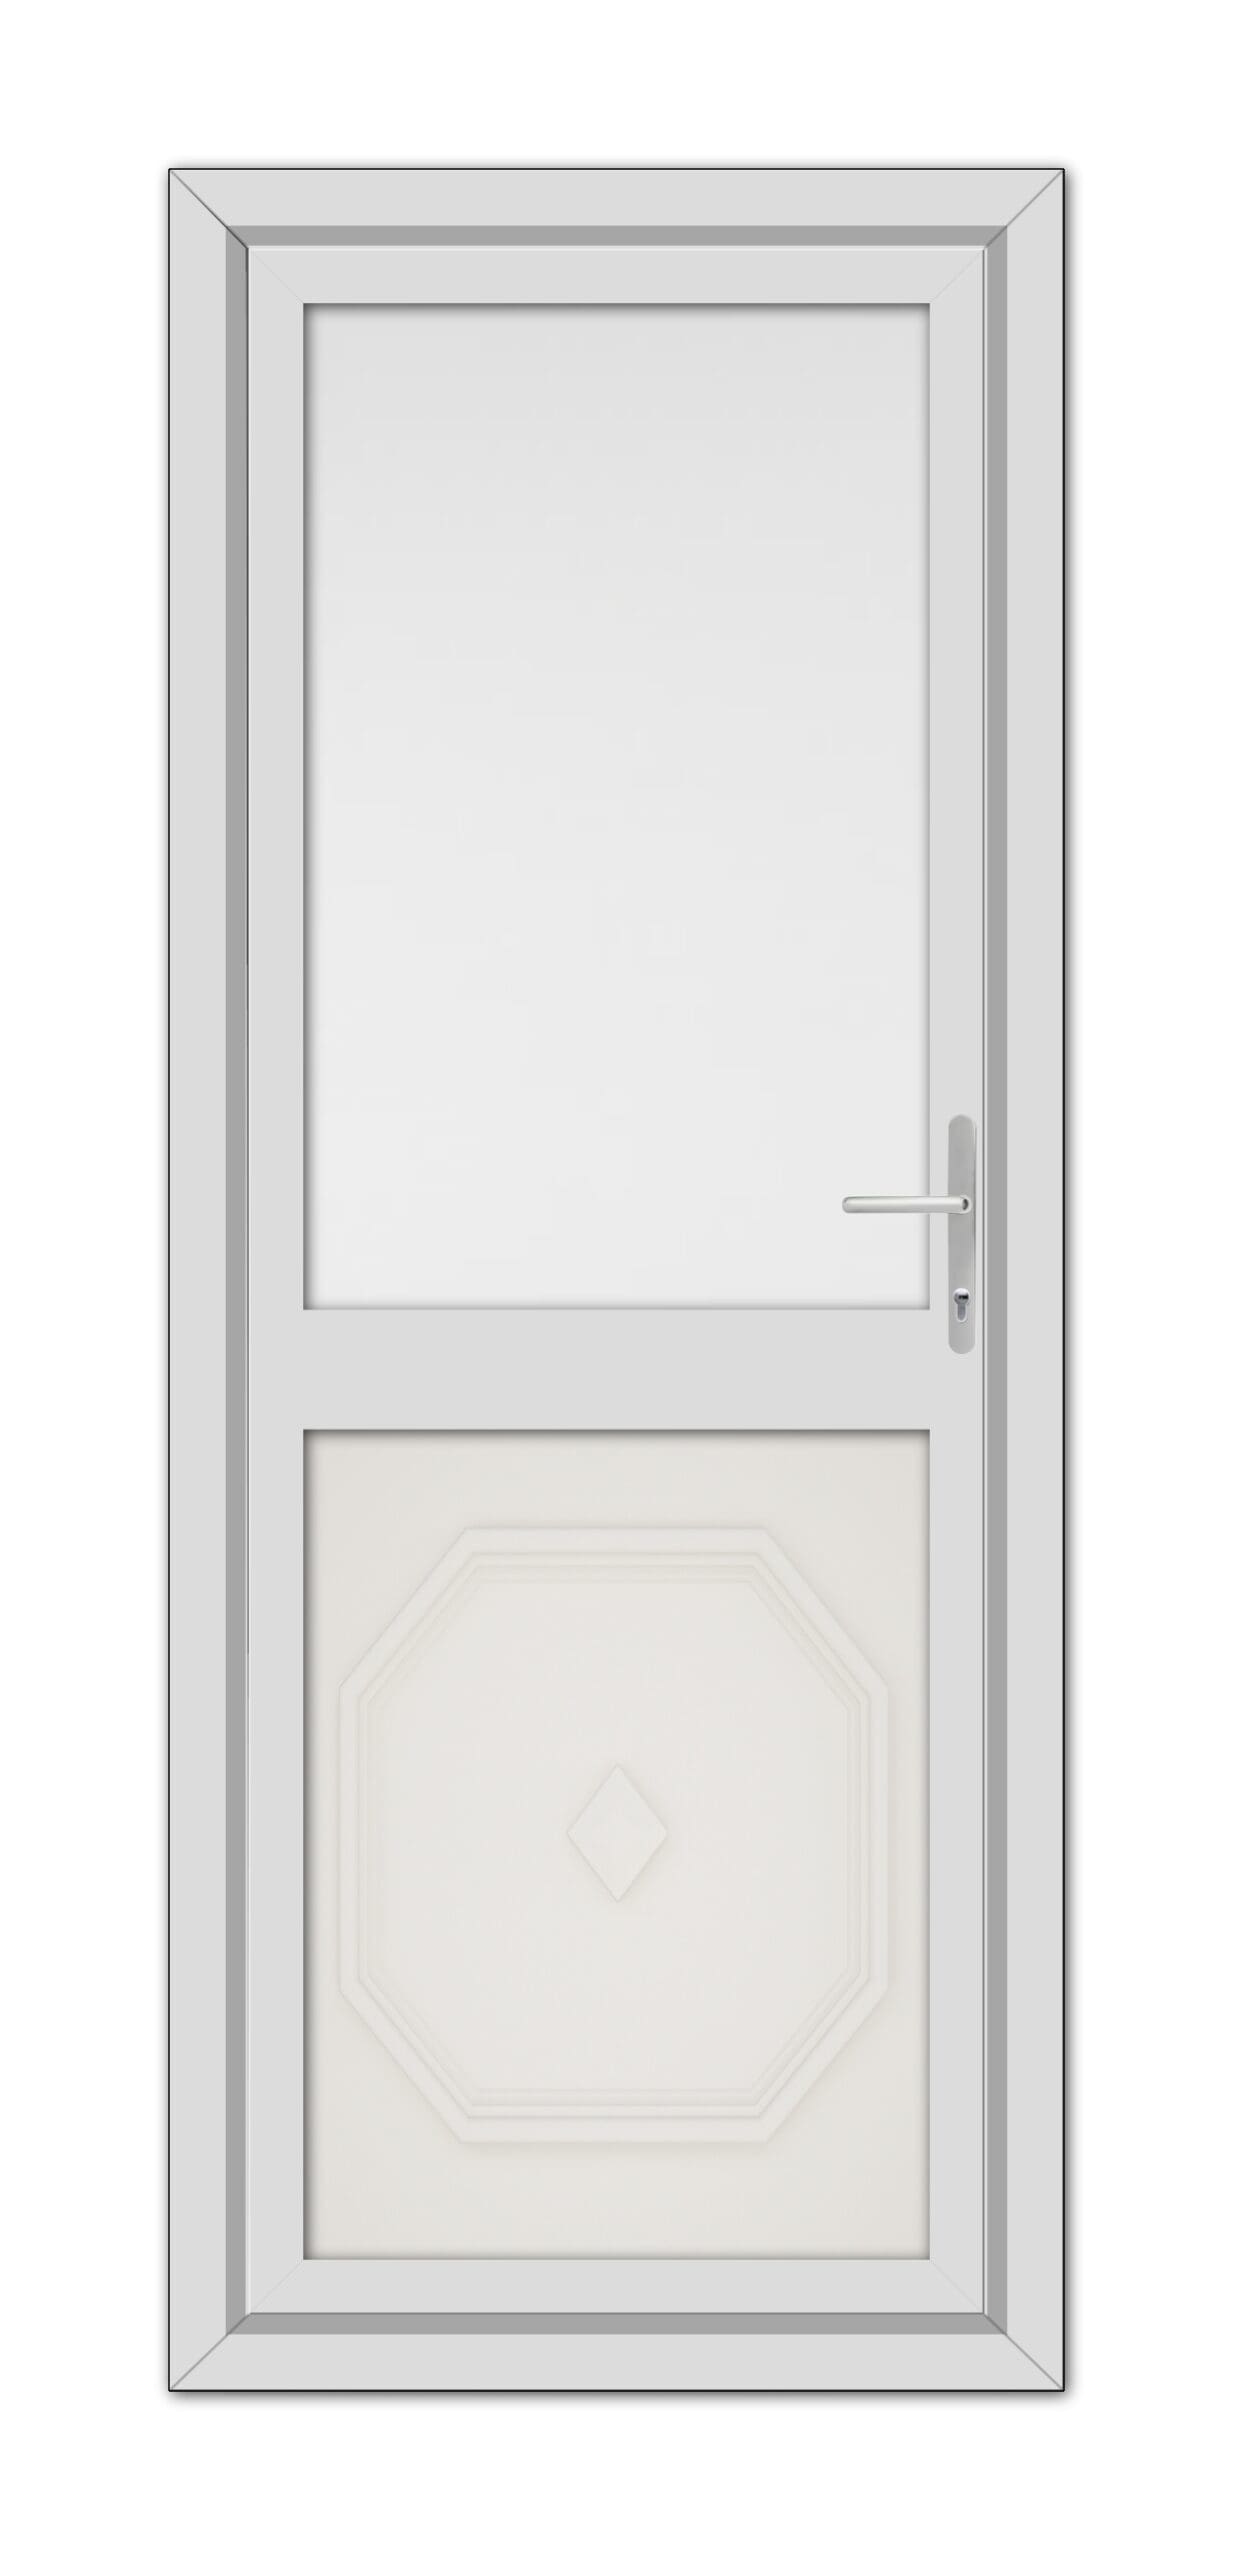 A White Cream Westminster Half uPVC Back Door with a geometric panel design at the bottom, a clear glass window at the top, and a silver handle, isolated on a white background.